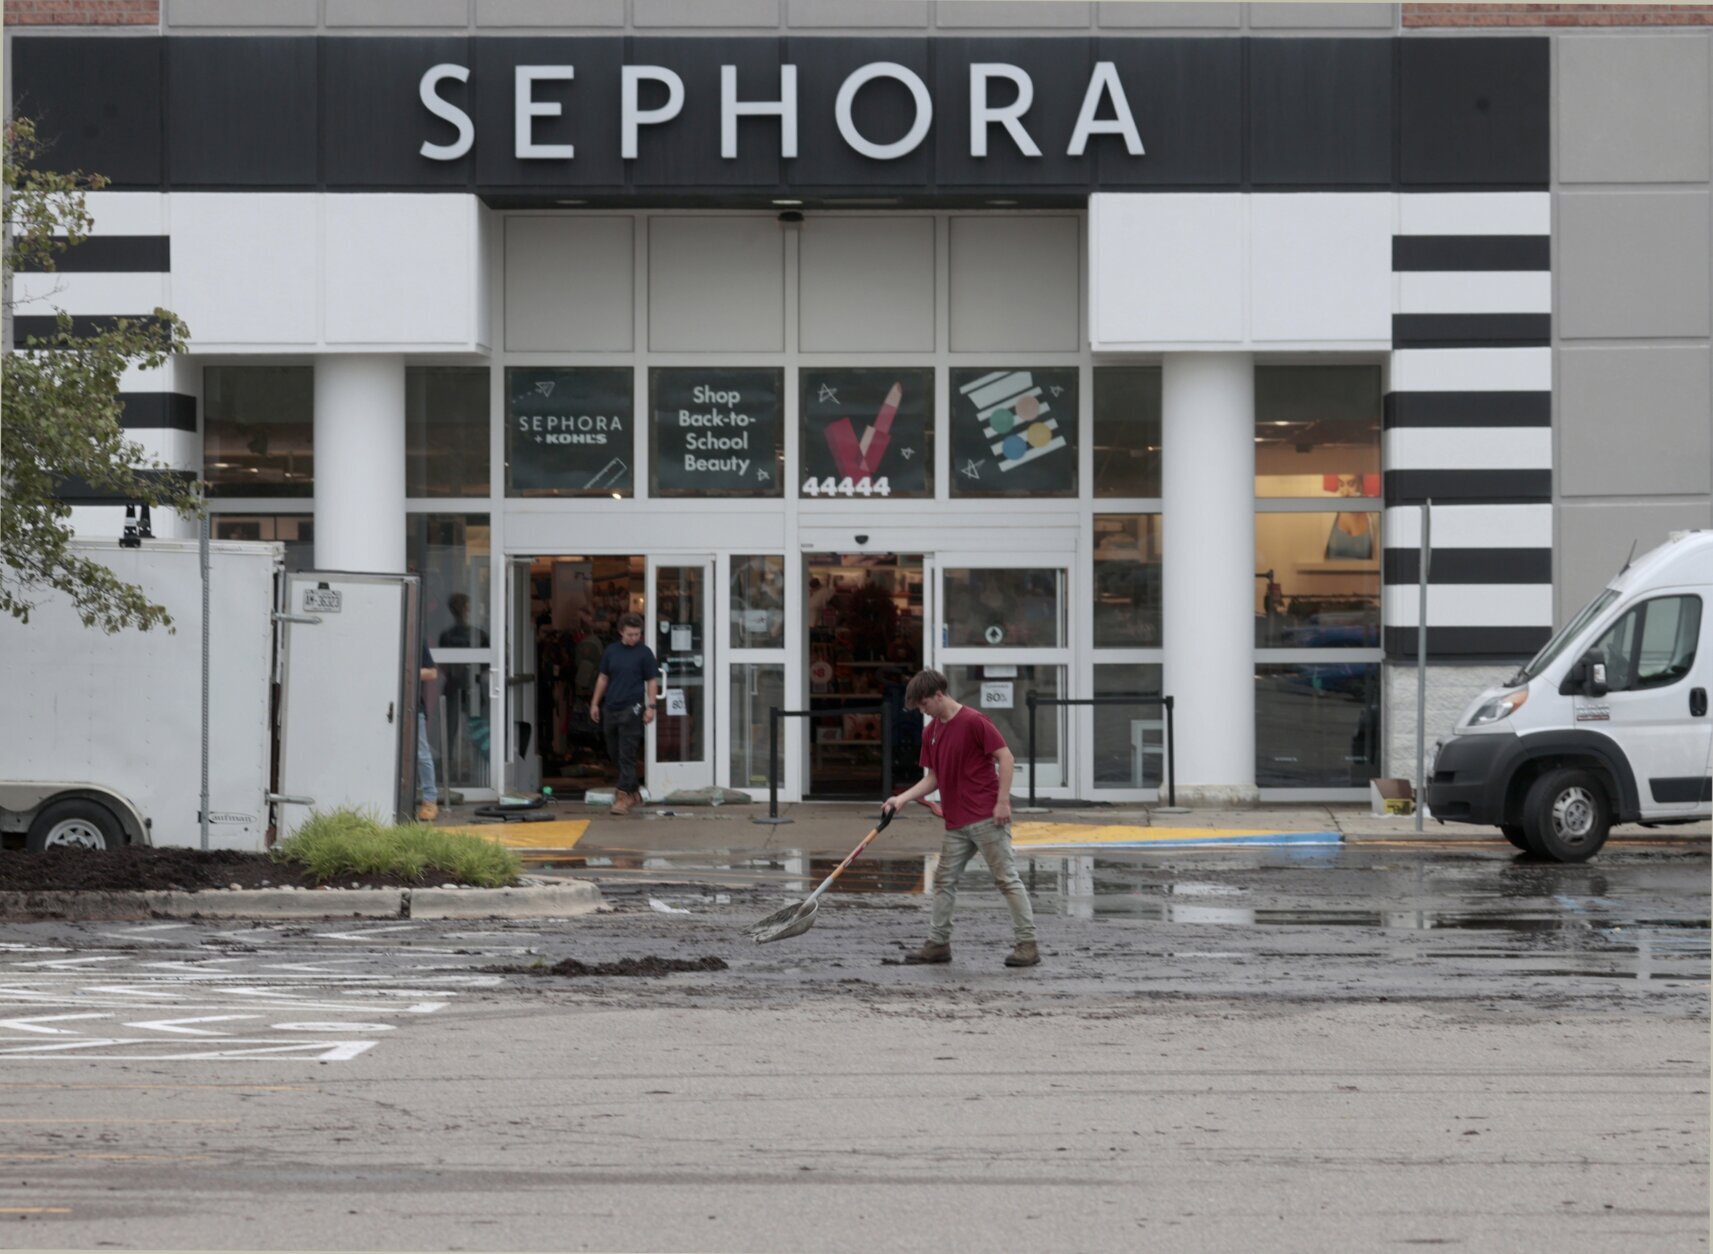 Sephora Opening Inside 4 West MI Kohl's Stores This Fall